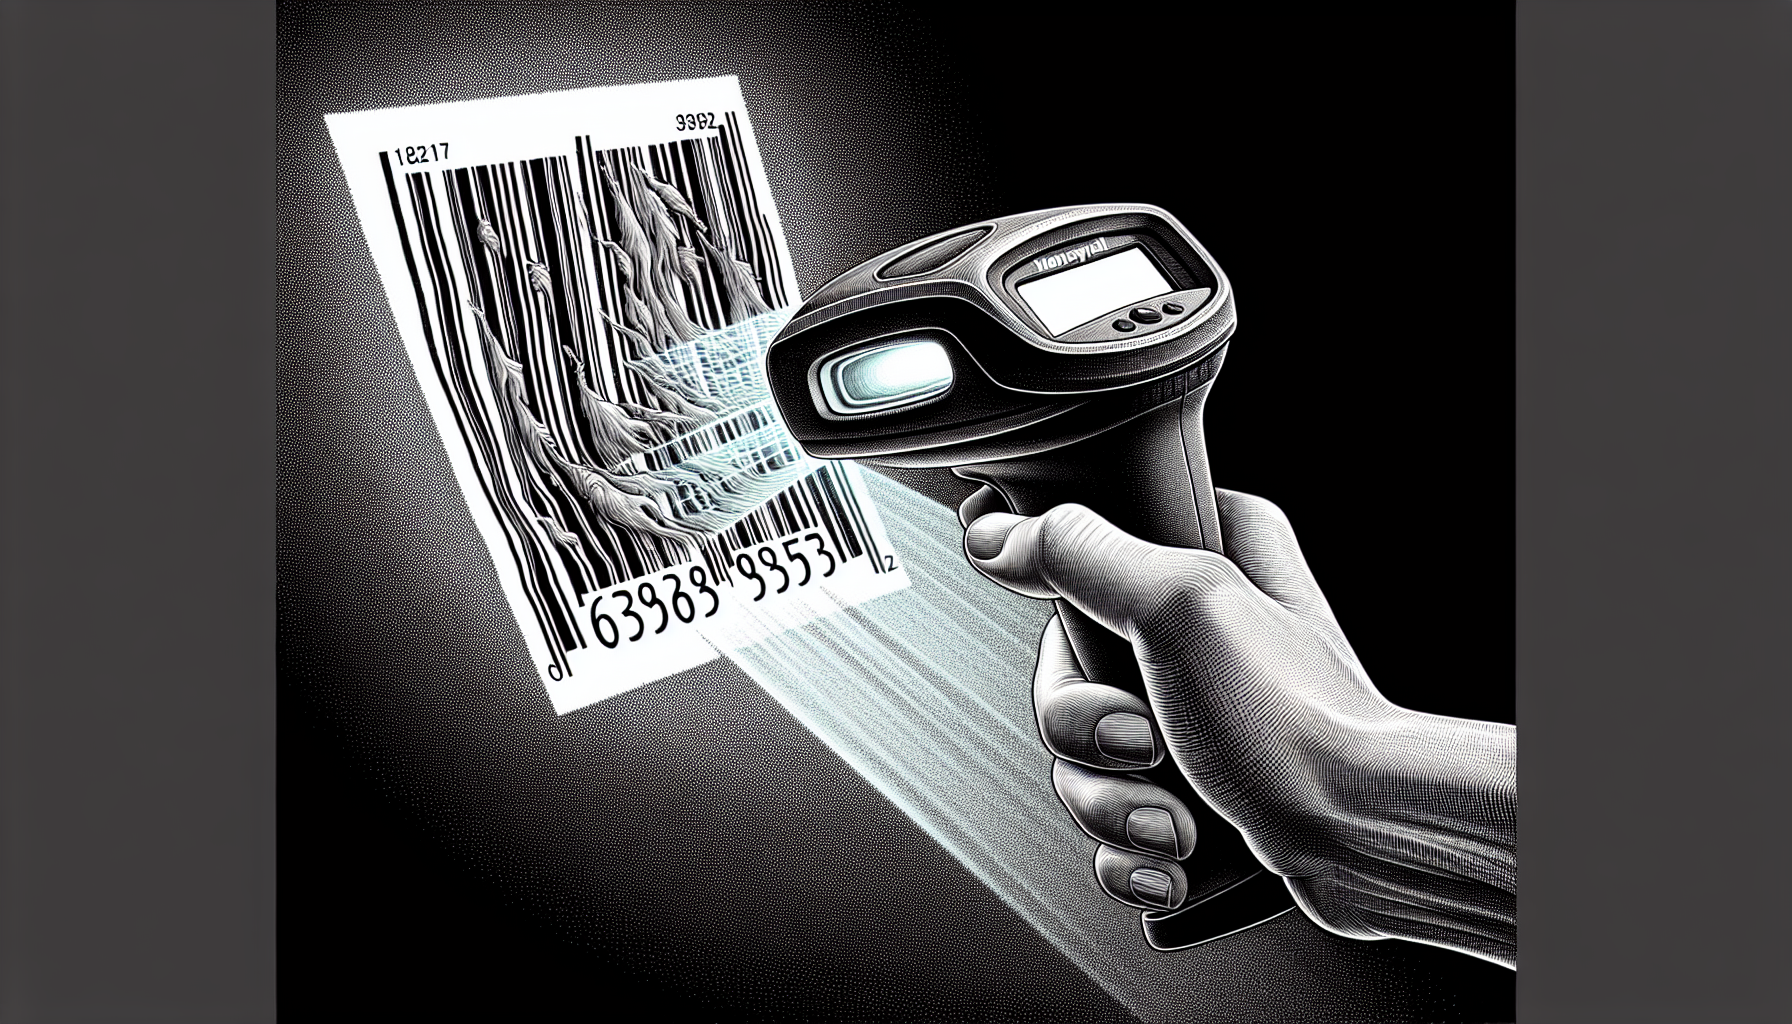 Illustration of a Honeywell barcode scanner reading a damaged barcode